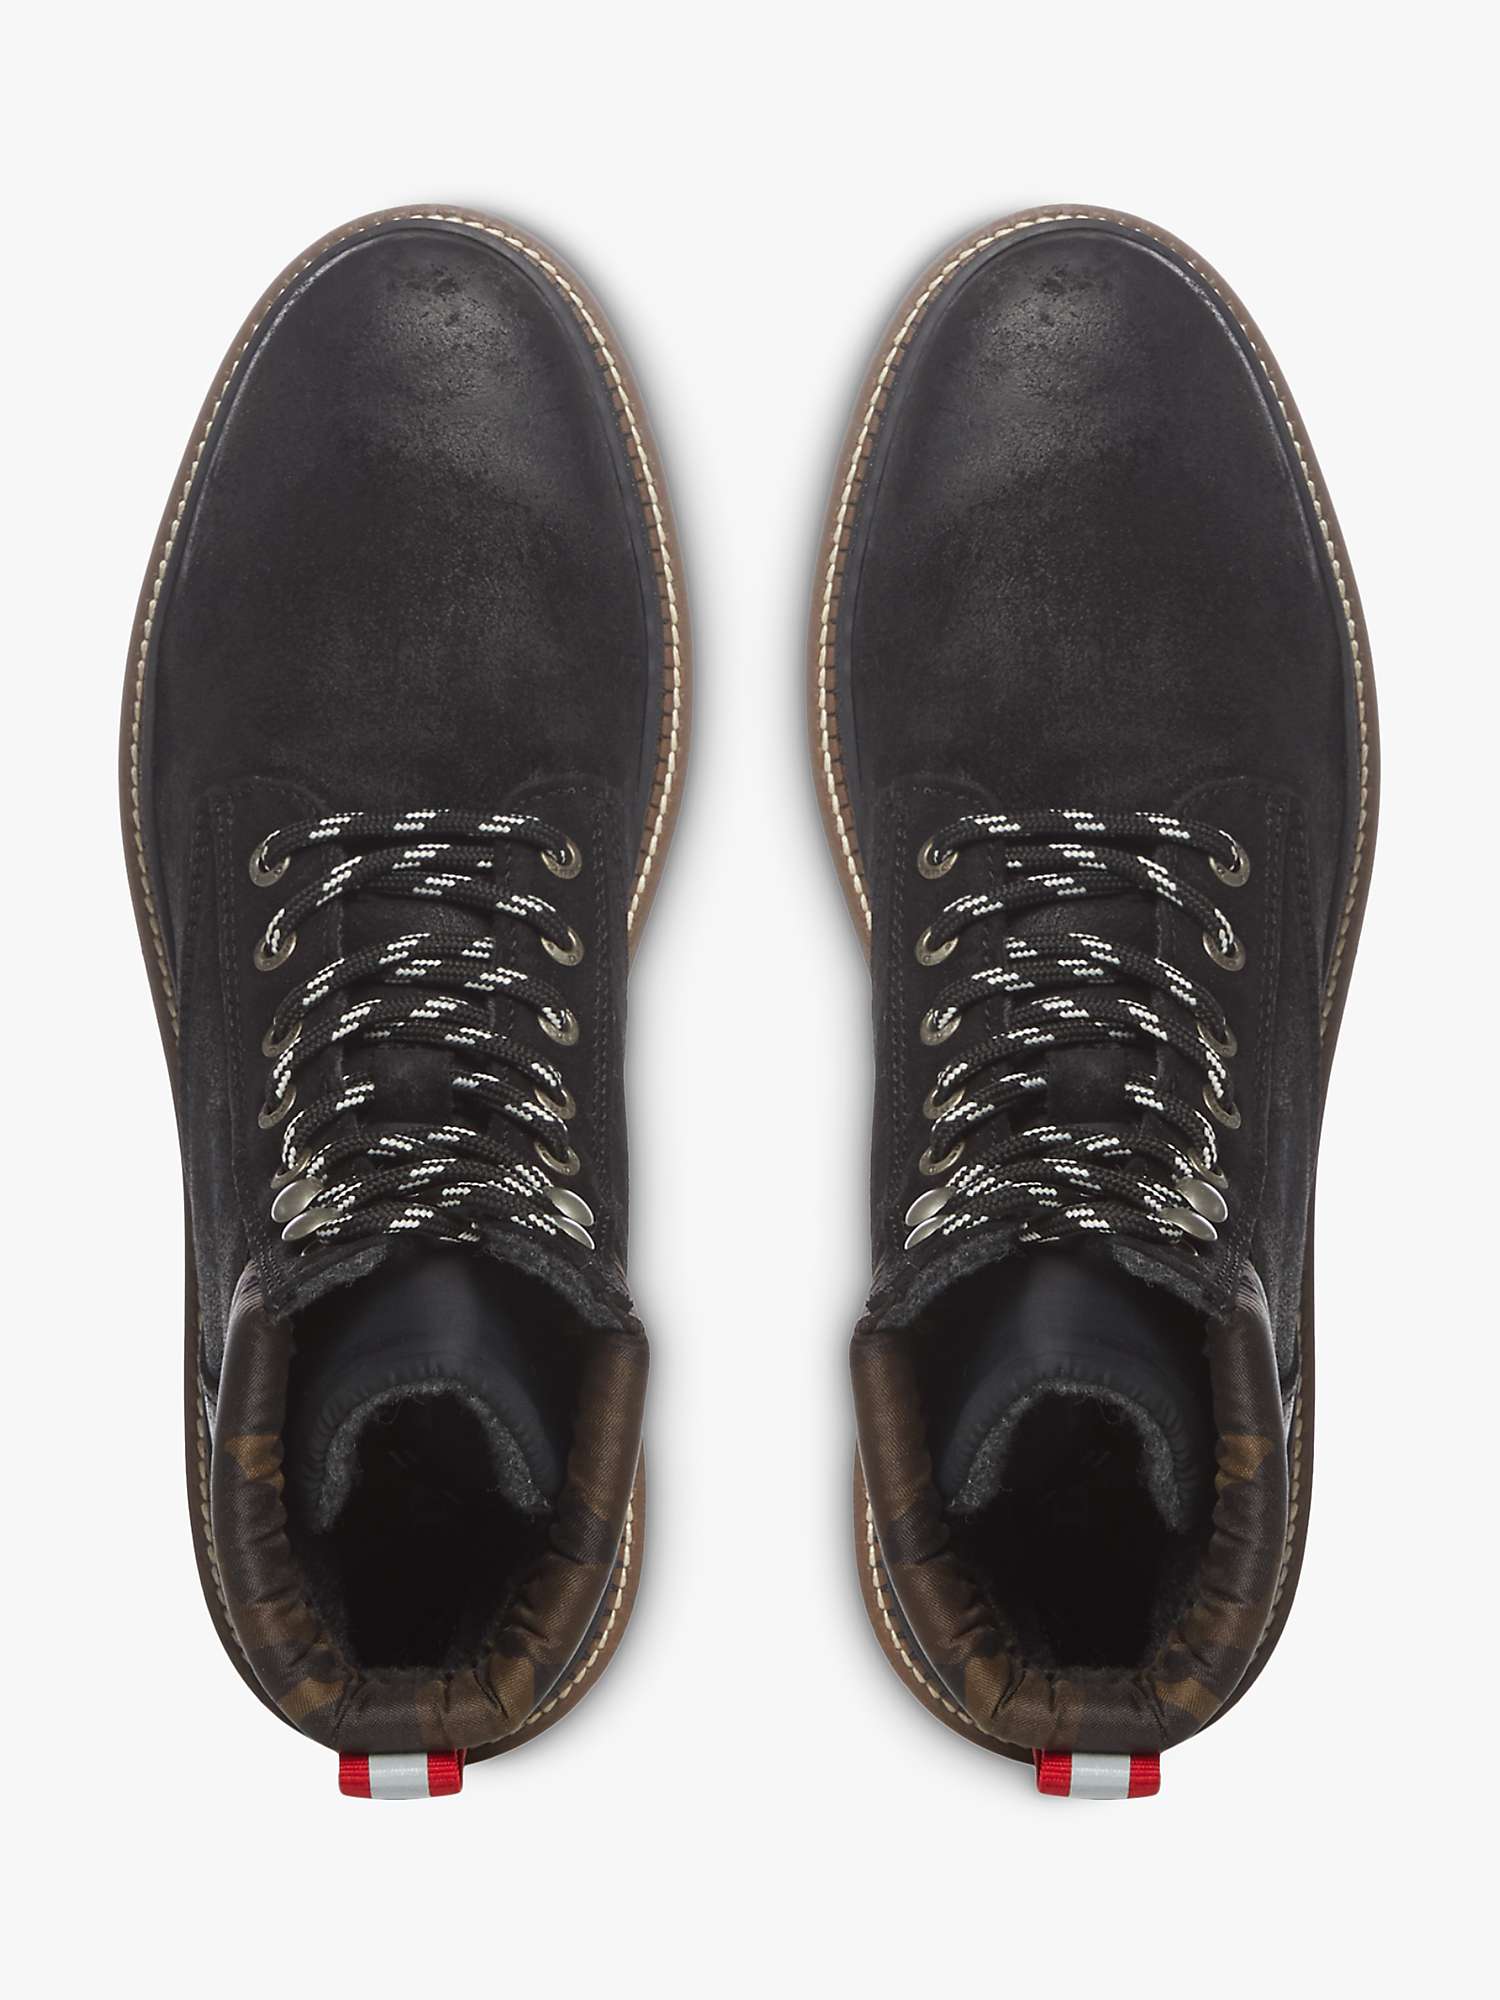 Buy Dune Cordial Suede Chunky Hiker Boots, Black Online at johnlewis.com